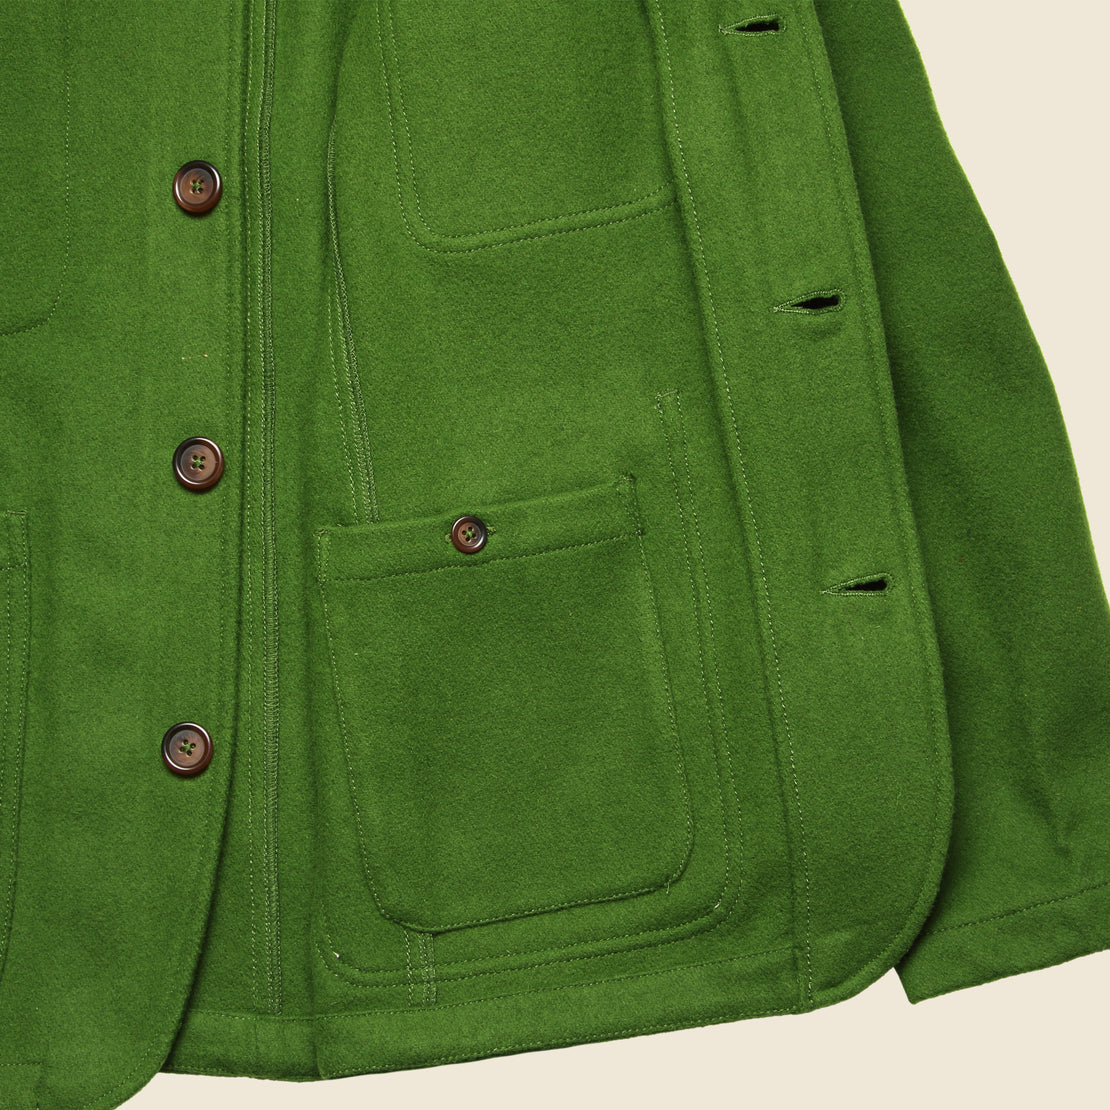 Mowbray Long Bakers Jacket - Green - Universal Works - STAG Provisions - Outerwear - Coat / Jacket